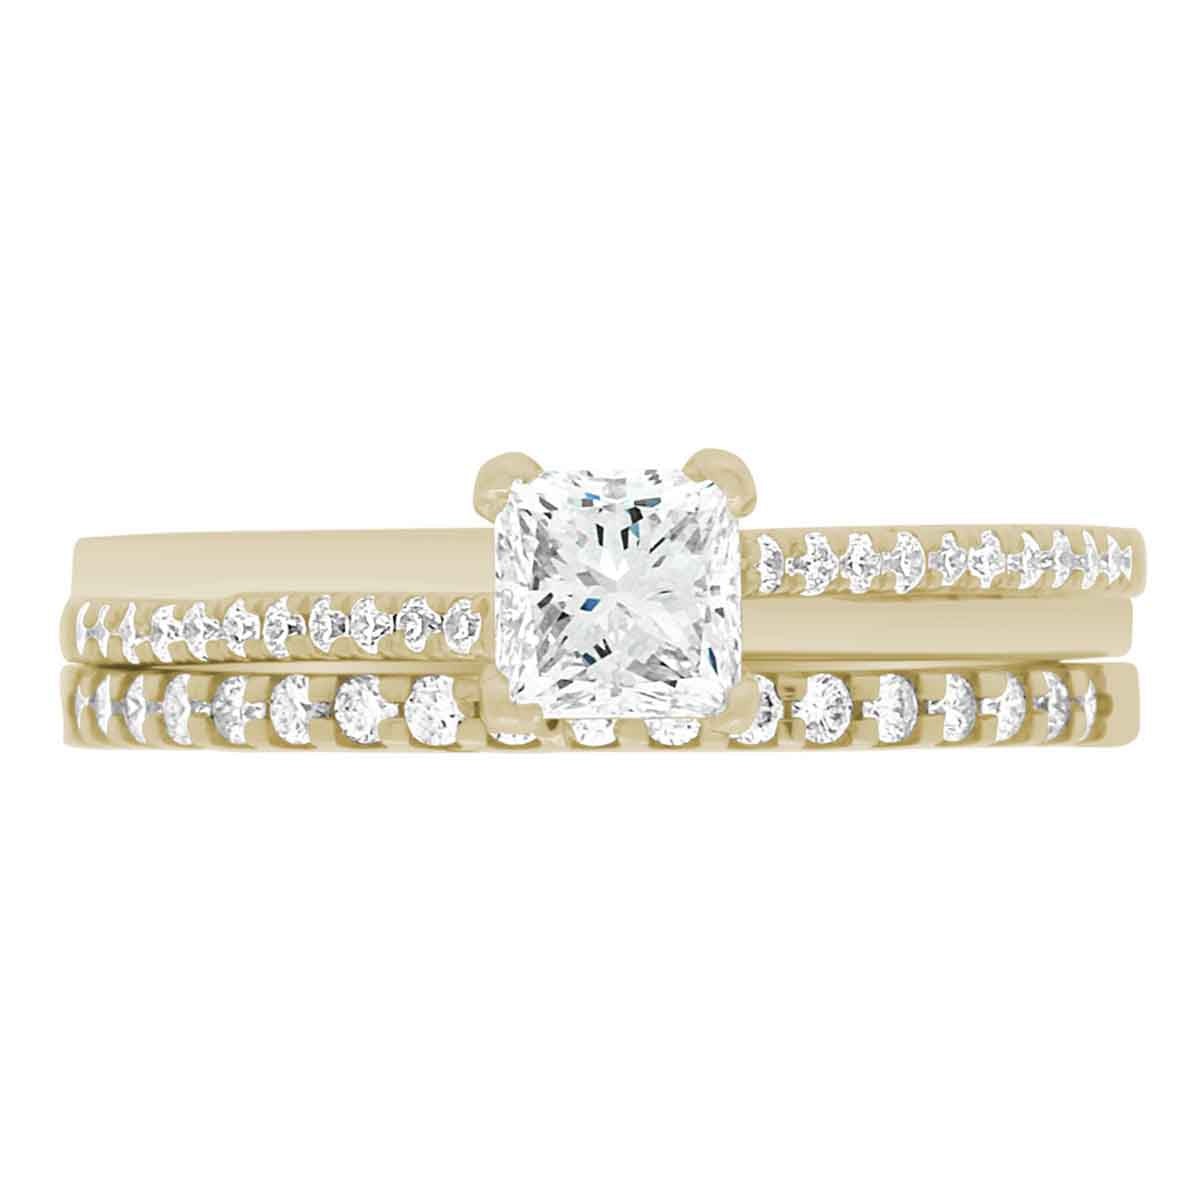 Promise Ring Style made from yellow gold pictured with a diamond wedding ring